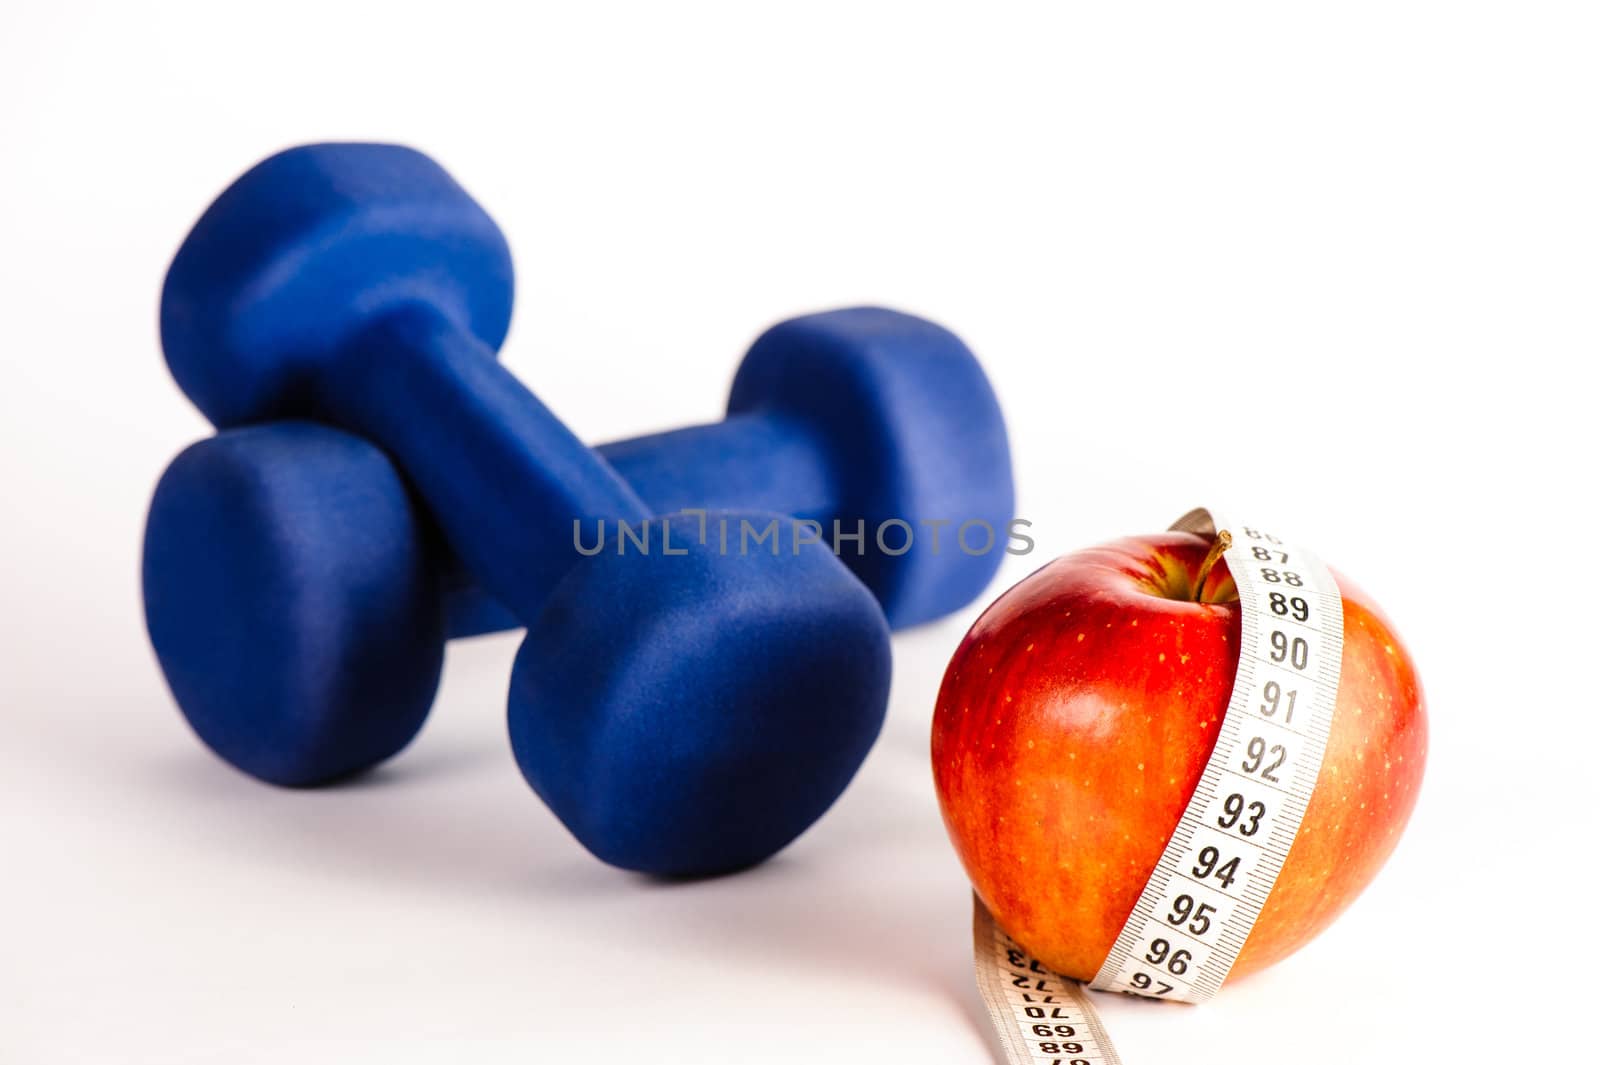 Blue dumbbells and red apple with measure tape by nvelichko